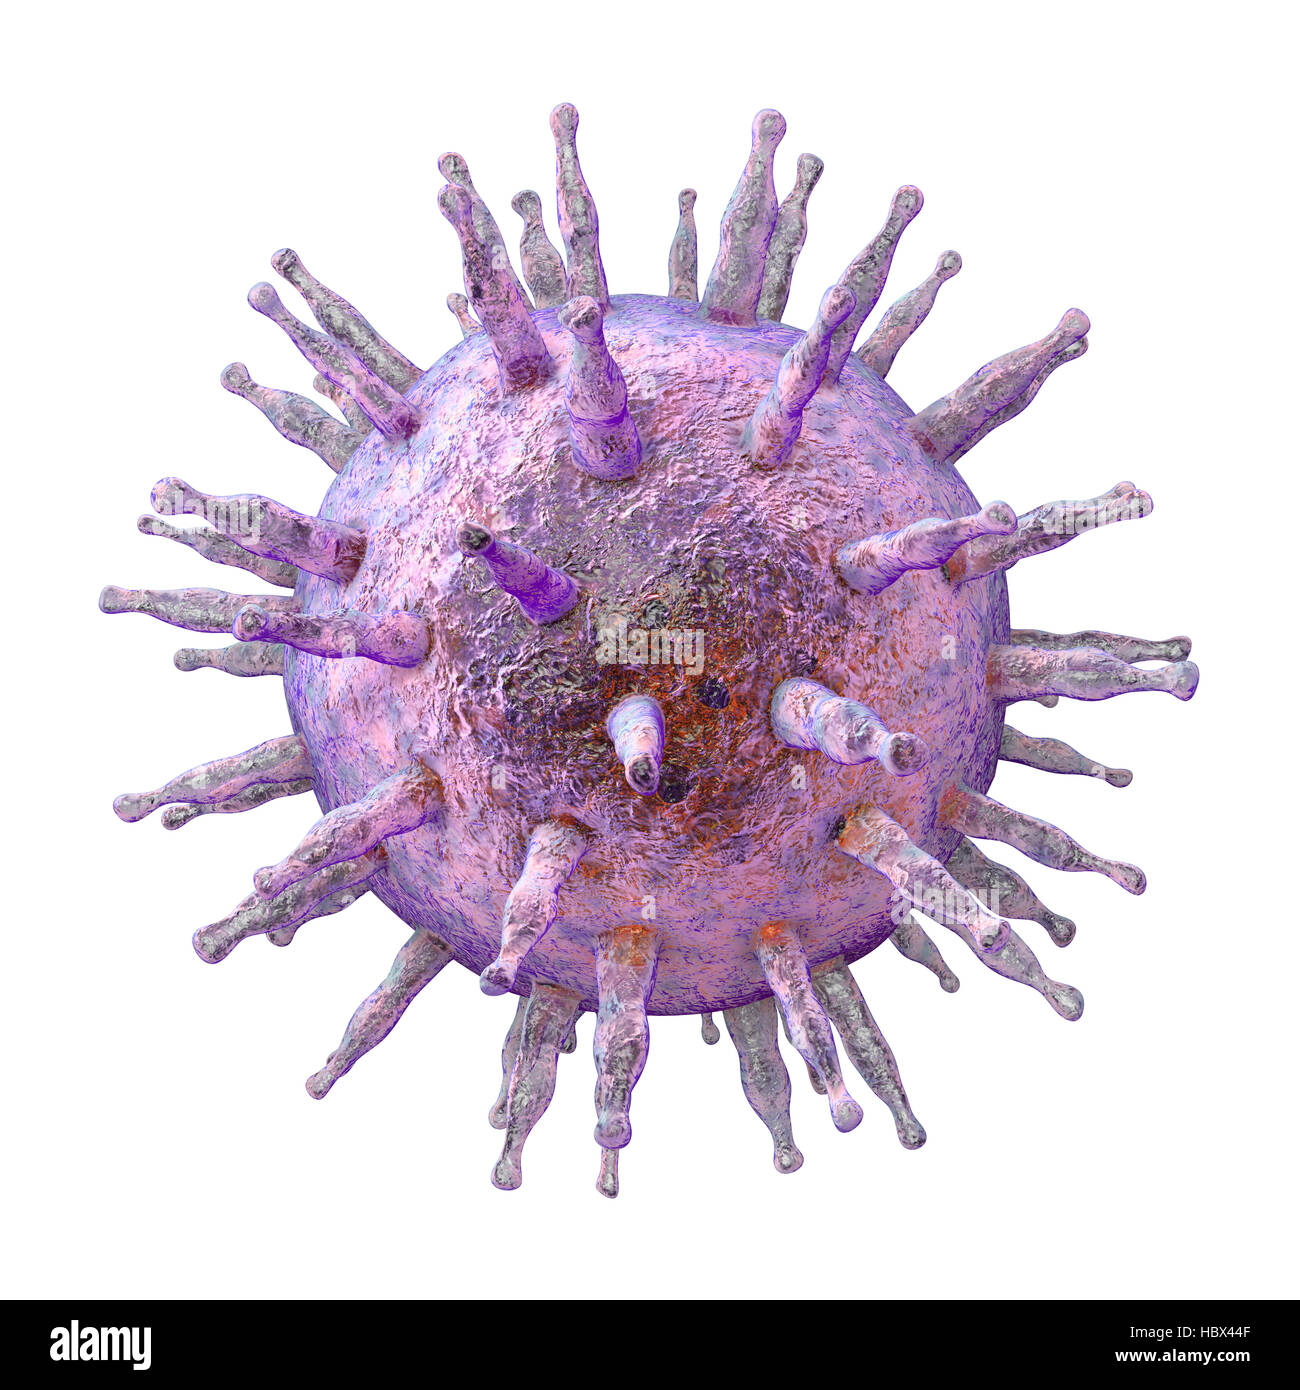 Epstein-Barr virus (EBV), computer illustration. EBV, also known as human herpes virus 4, is 1 of 8 herpes viruses that infects humans. It is best known as the cause of infectious mononucleosis (glandular fever), but is also associated with some forms of cancer, including Burkitt's lymphoma. In both infections, the virus infects one type of white blood cell, the B lymphocytes. Infection with EBV is common and usually harmless; additional factors potentiate the development of more serious diseases. Stock Photo